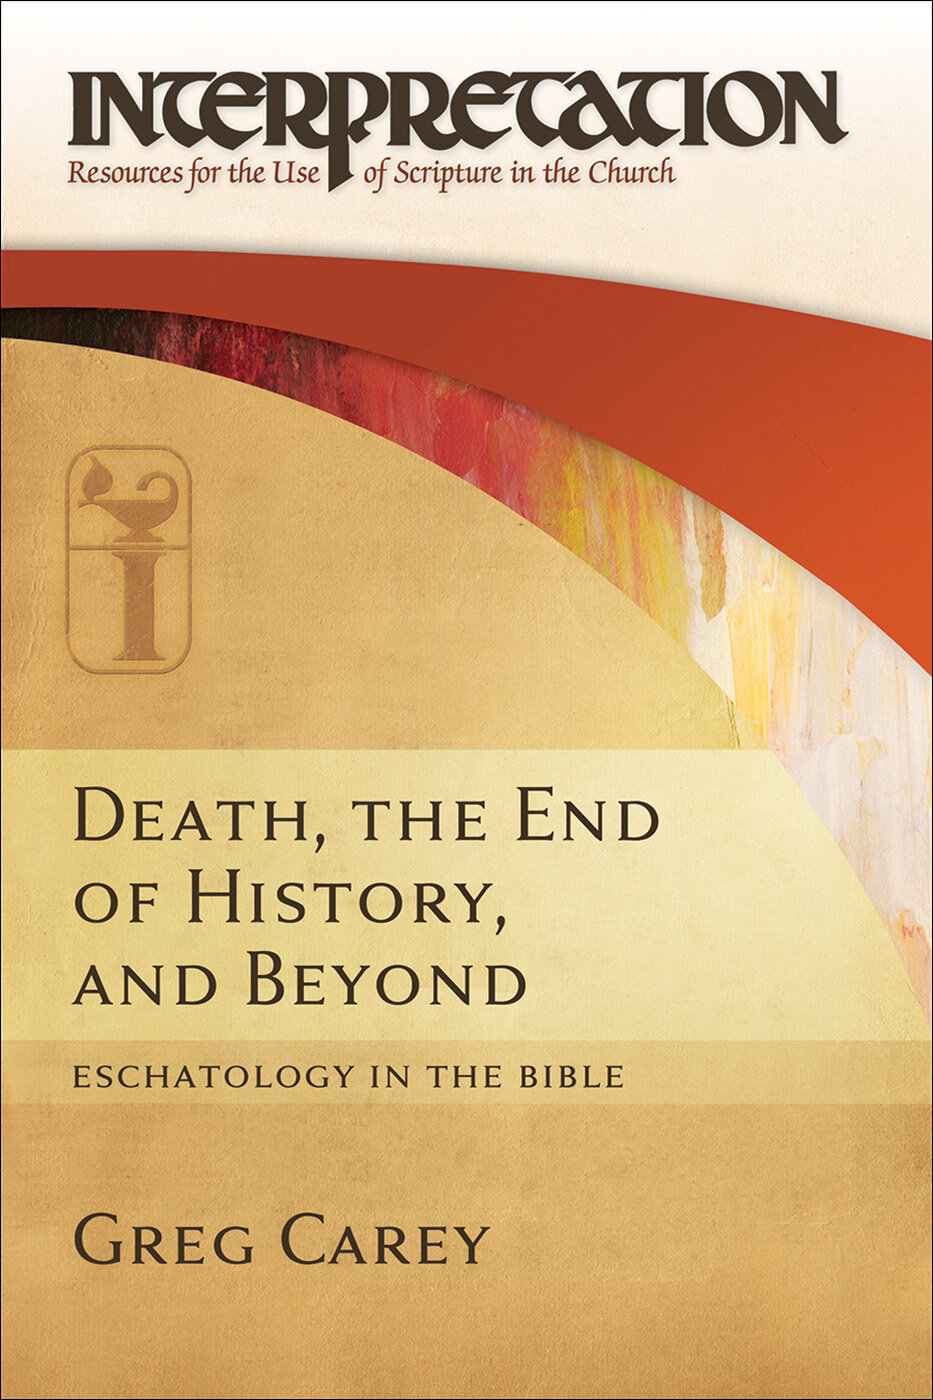 Death, the End of History, and Beyond: Eschatology in the Bible (Interpretation: Resources for the Use of Scripture in the Church)